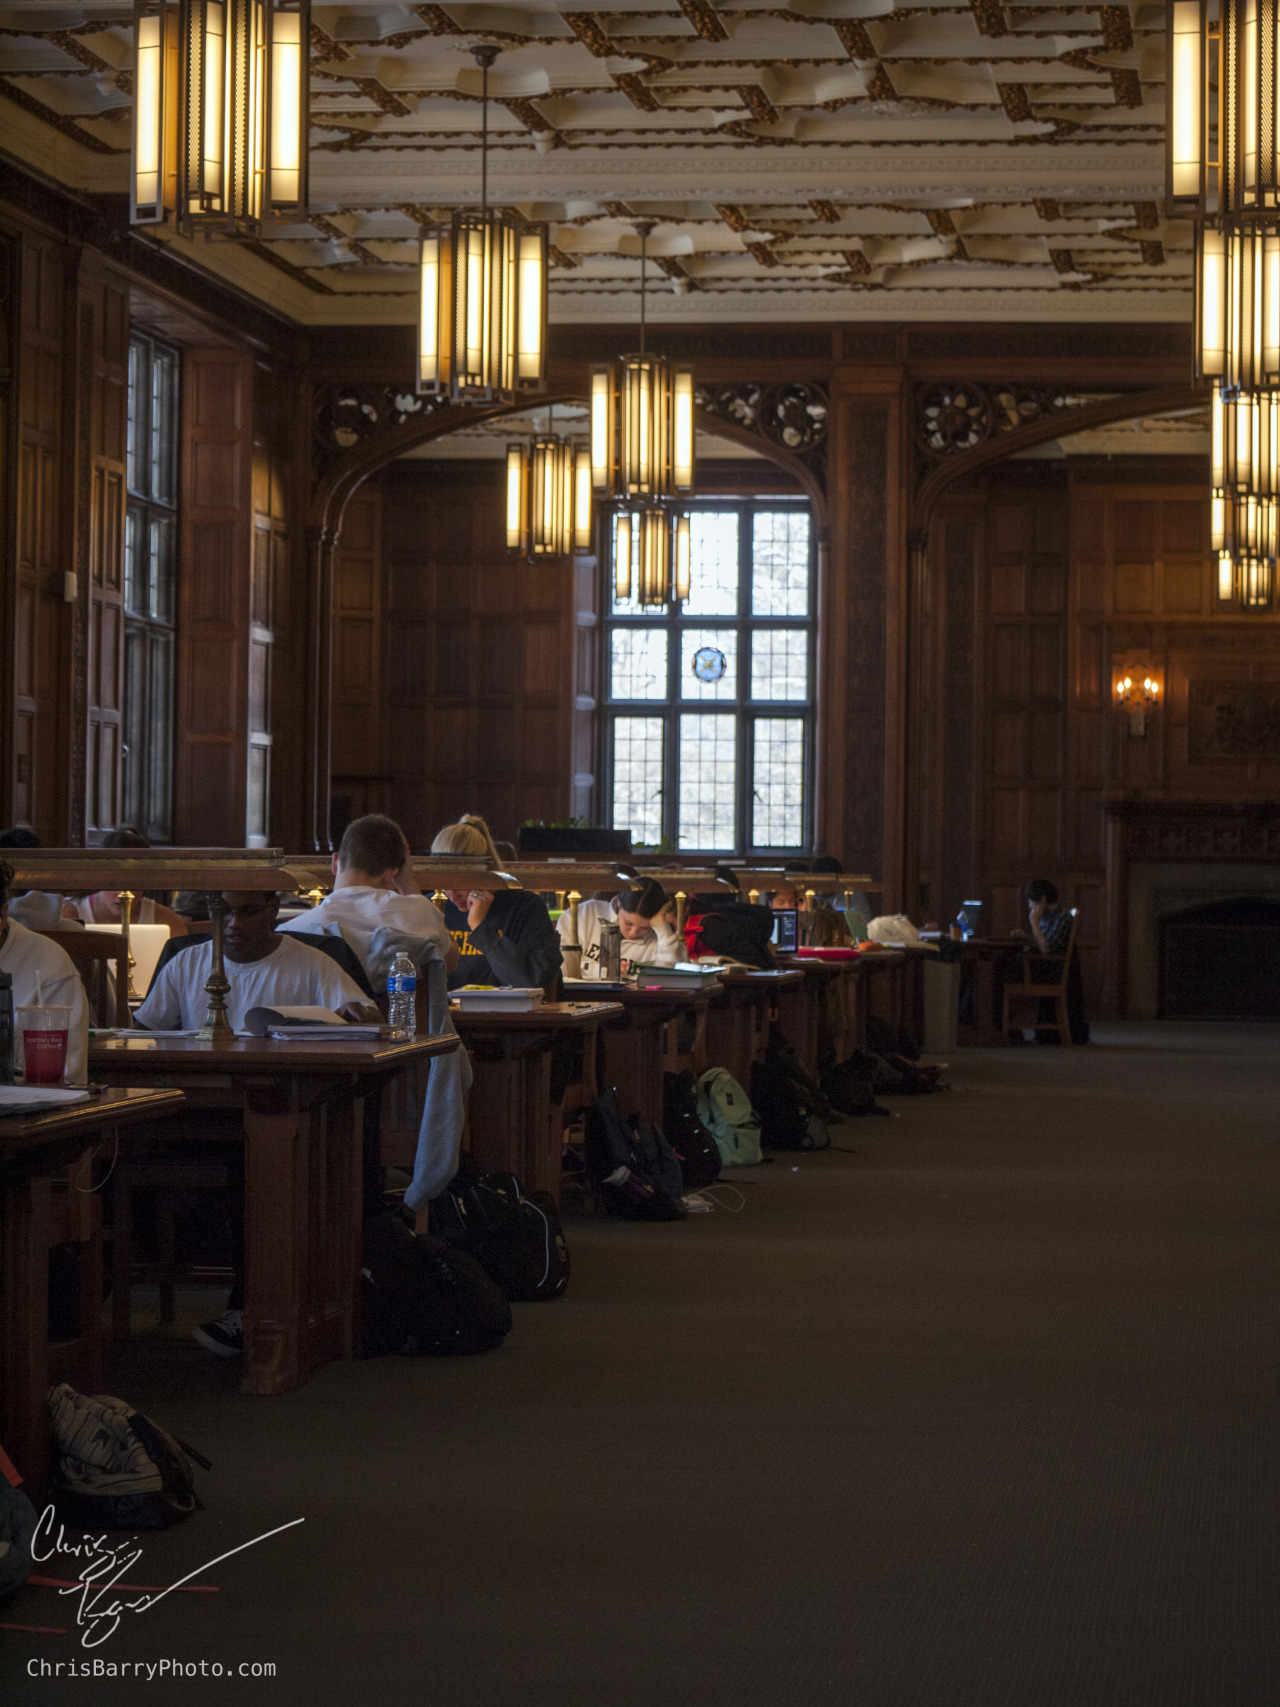 And lastly, people studying in Linderman